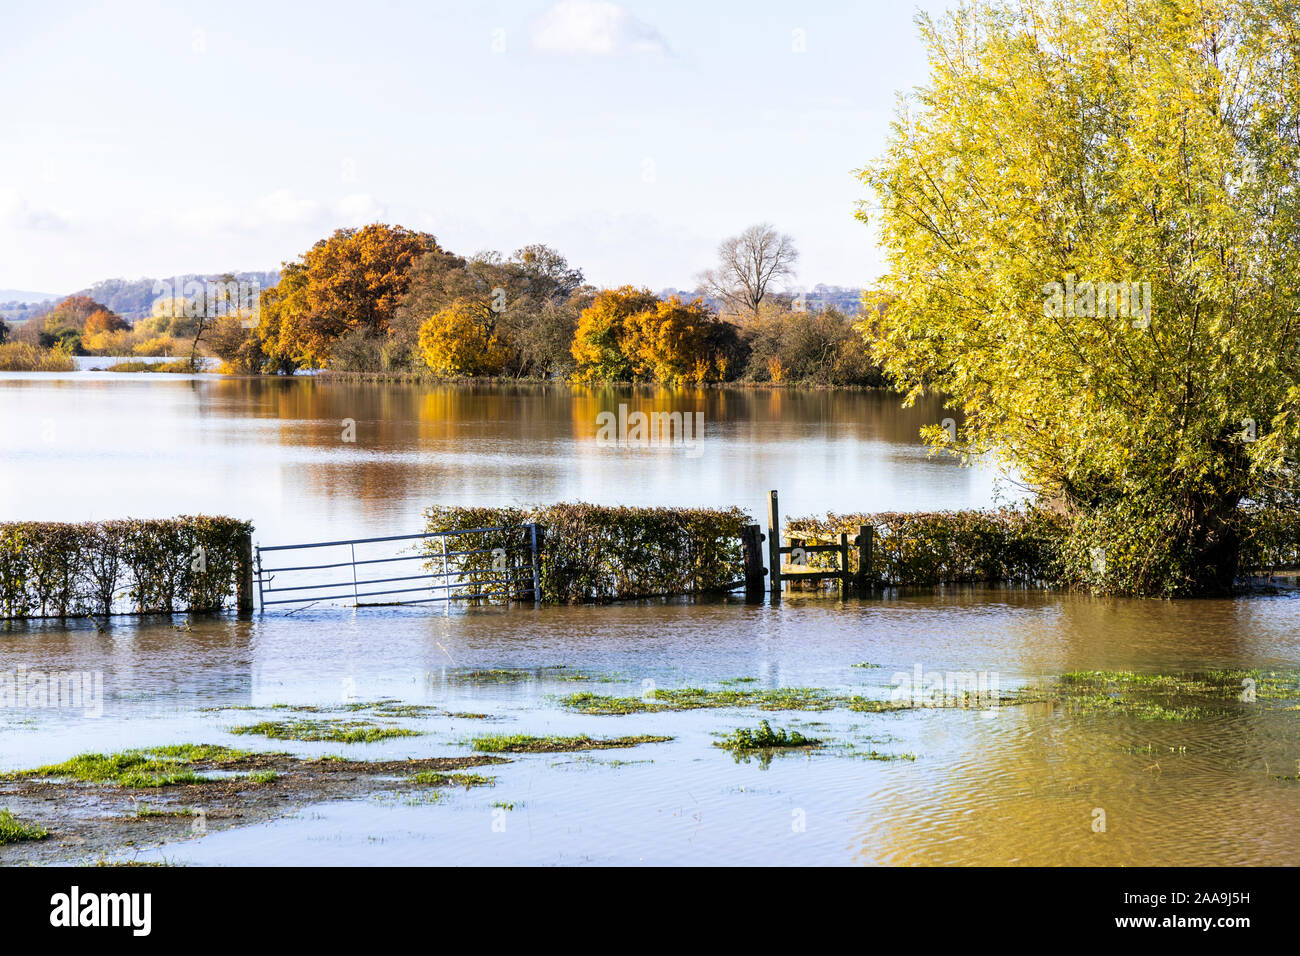 Floodwater from the River Severn filling the fields around the Severn Vale village of Deerhurst, Gloucestershire UK on 18/11/2019 Stock Photo